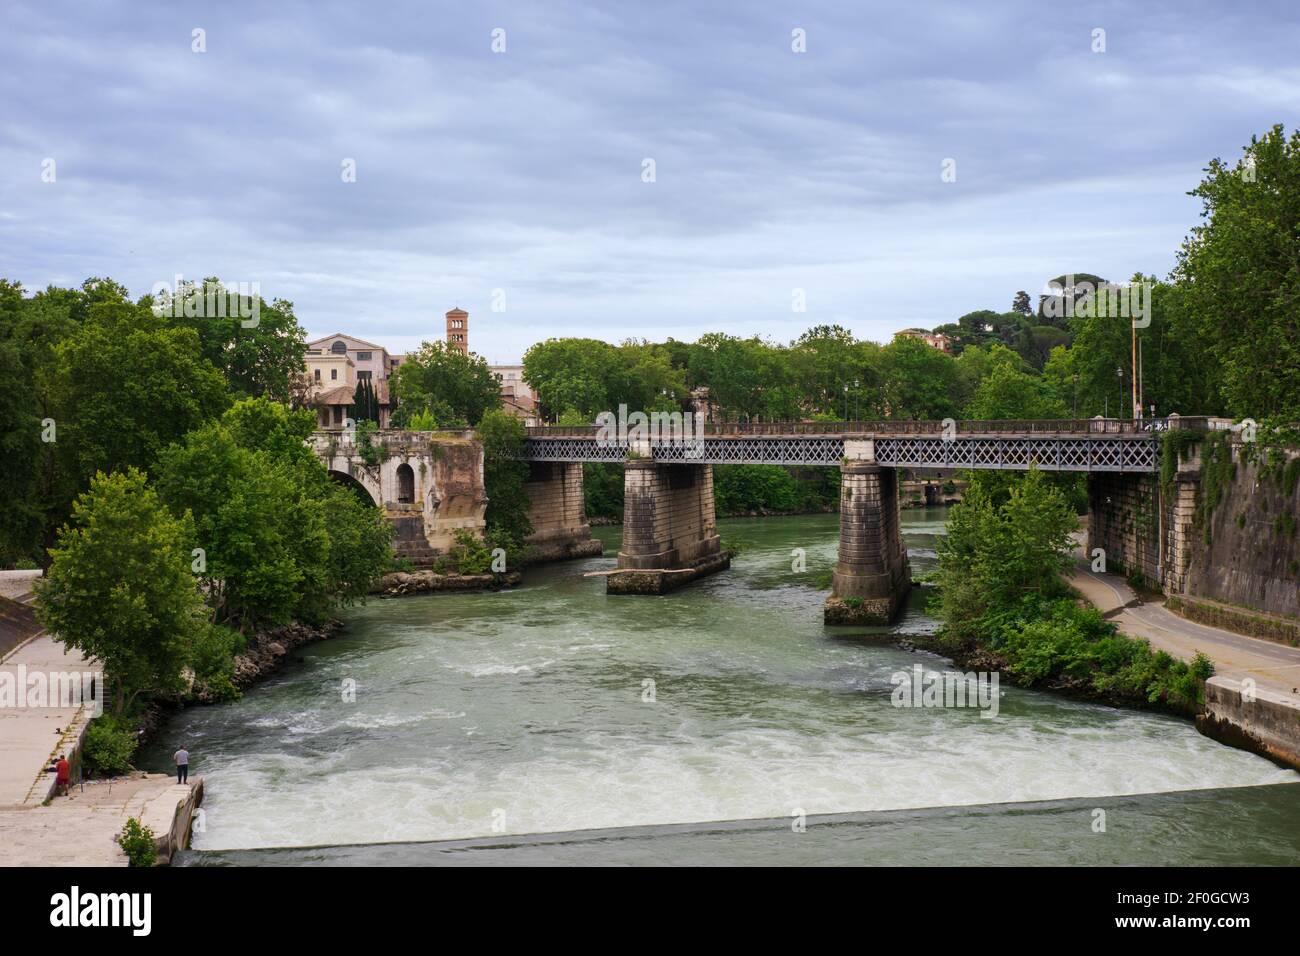 The water of the Tiber river flows under the Palatine bridge, lapping the old Ponte Rotto (Emilio) bridge, green trees surround the banks of the river Stock Photo